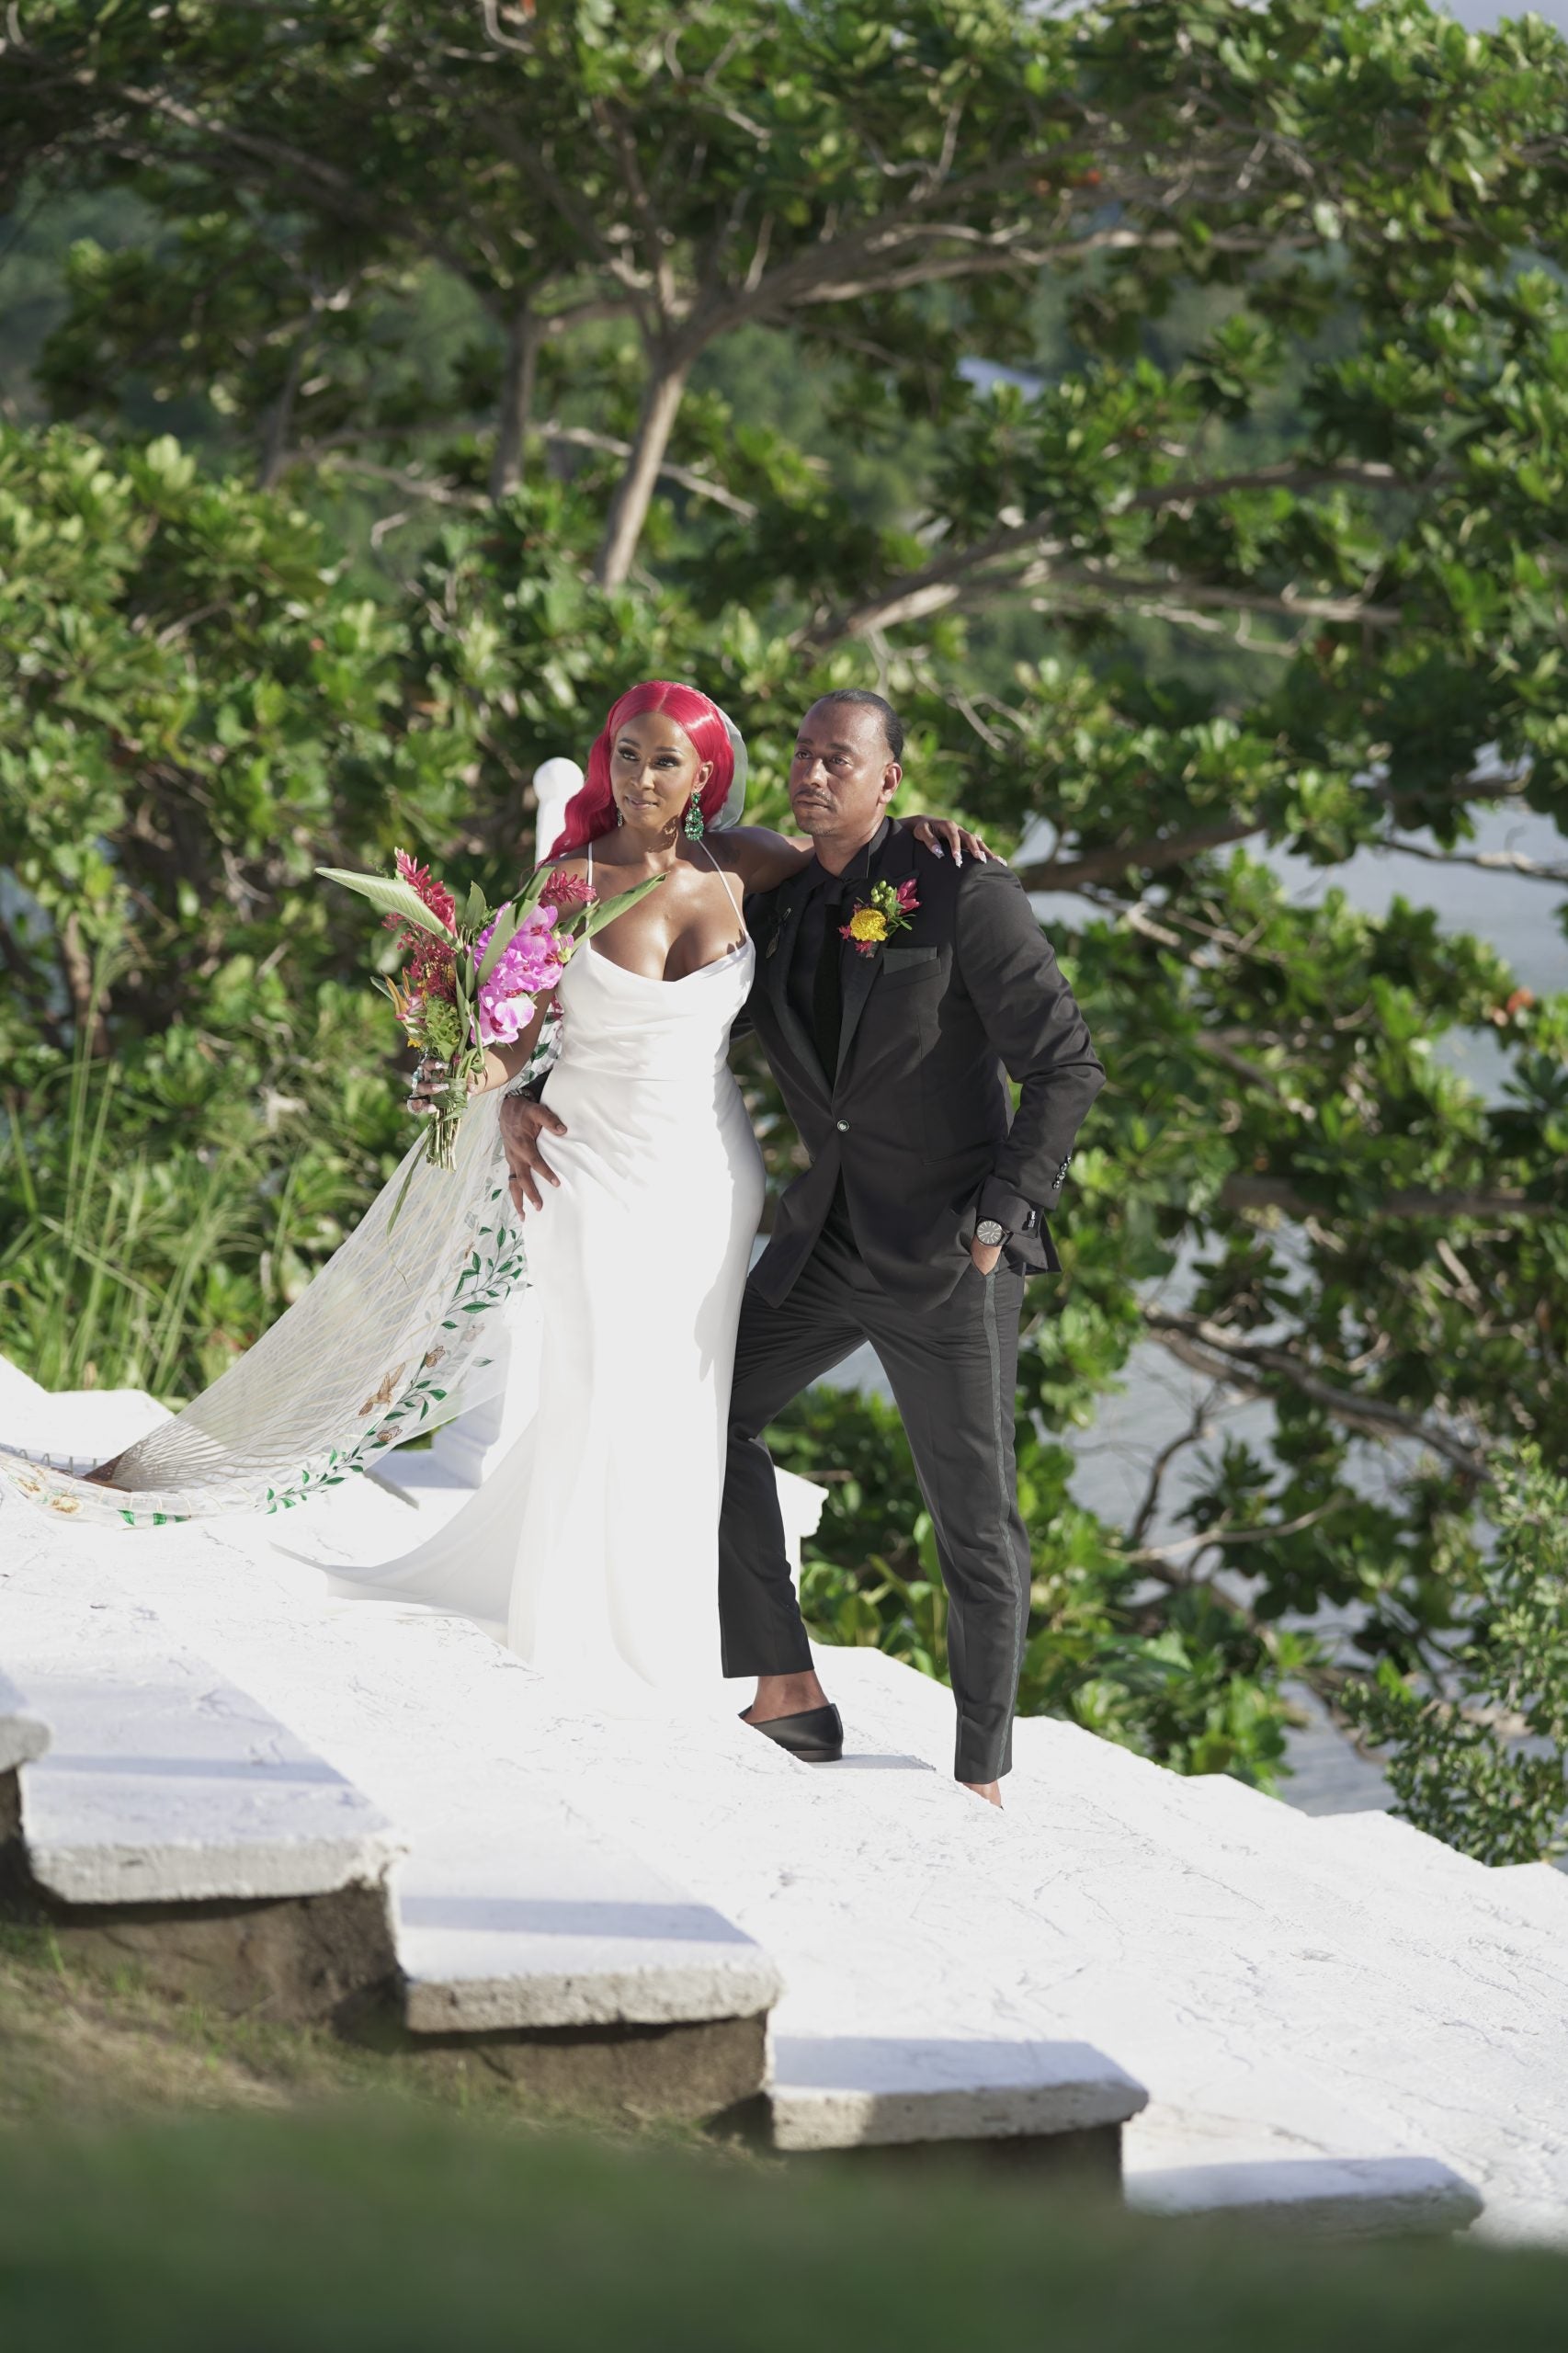 Bridal Bliss: After Proposing With Three Rings, Mario Married Chanell At A Castle In Jamaica